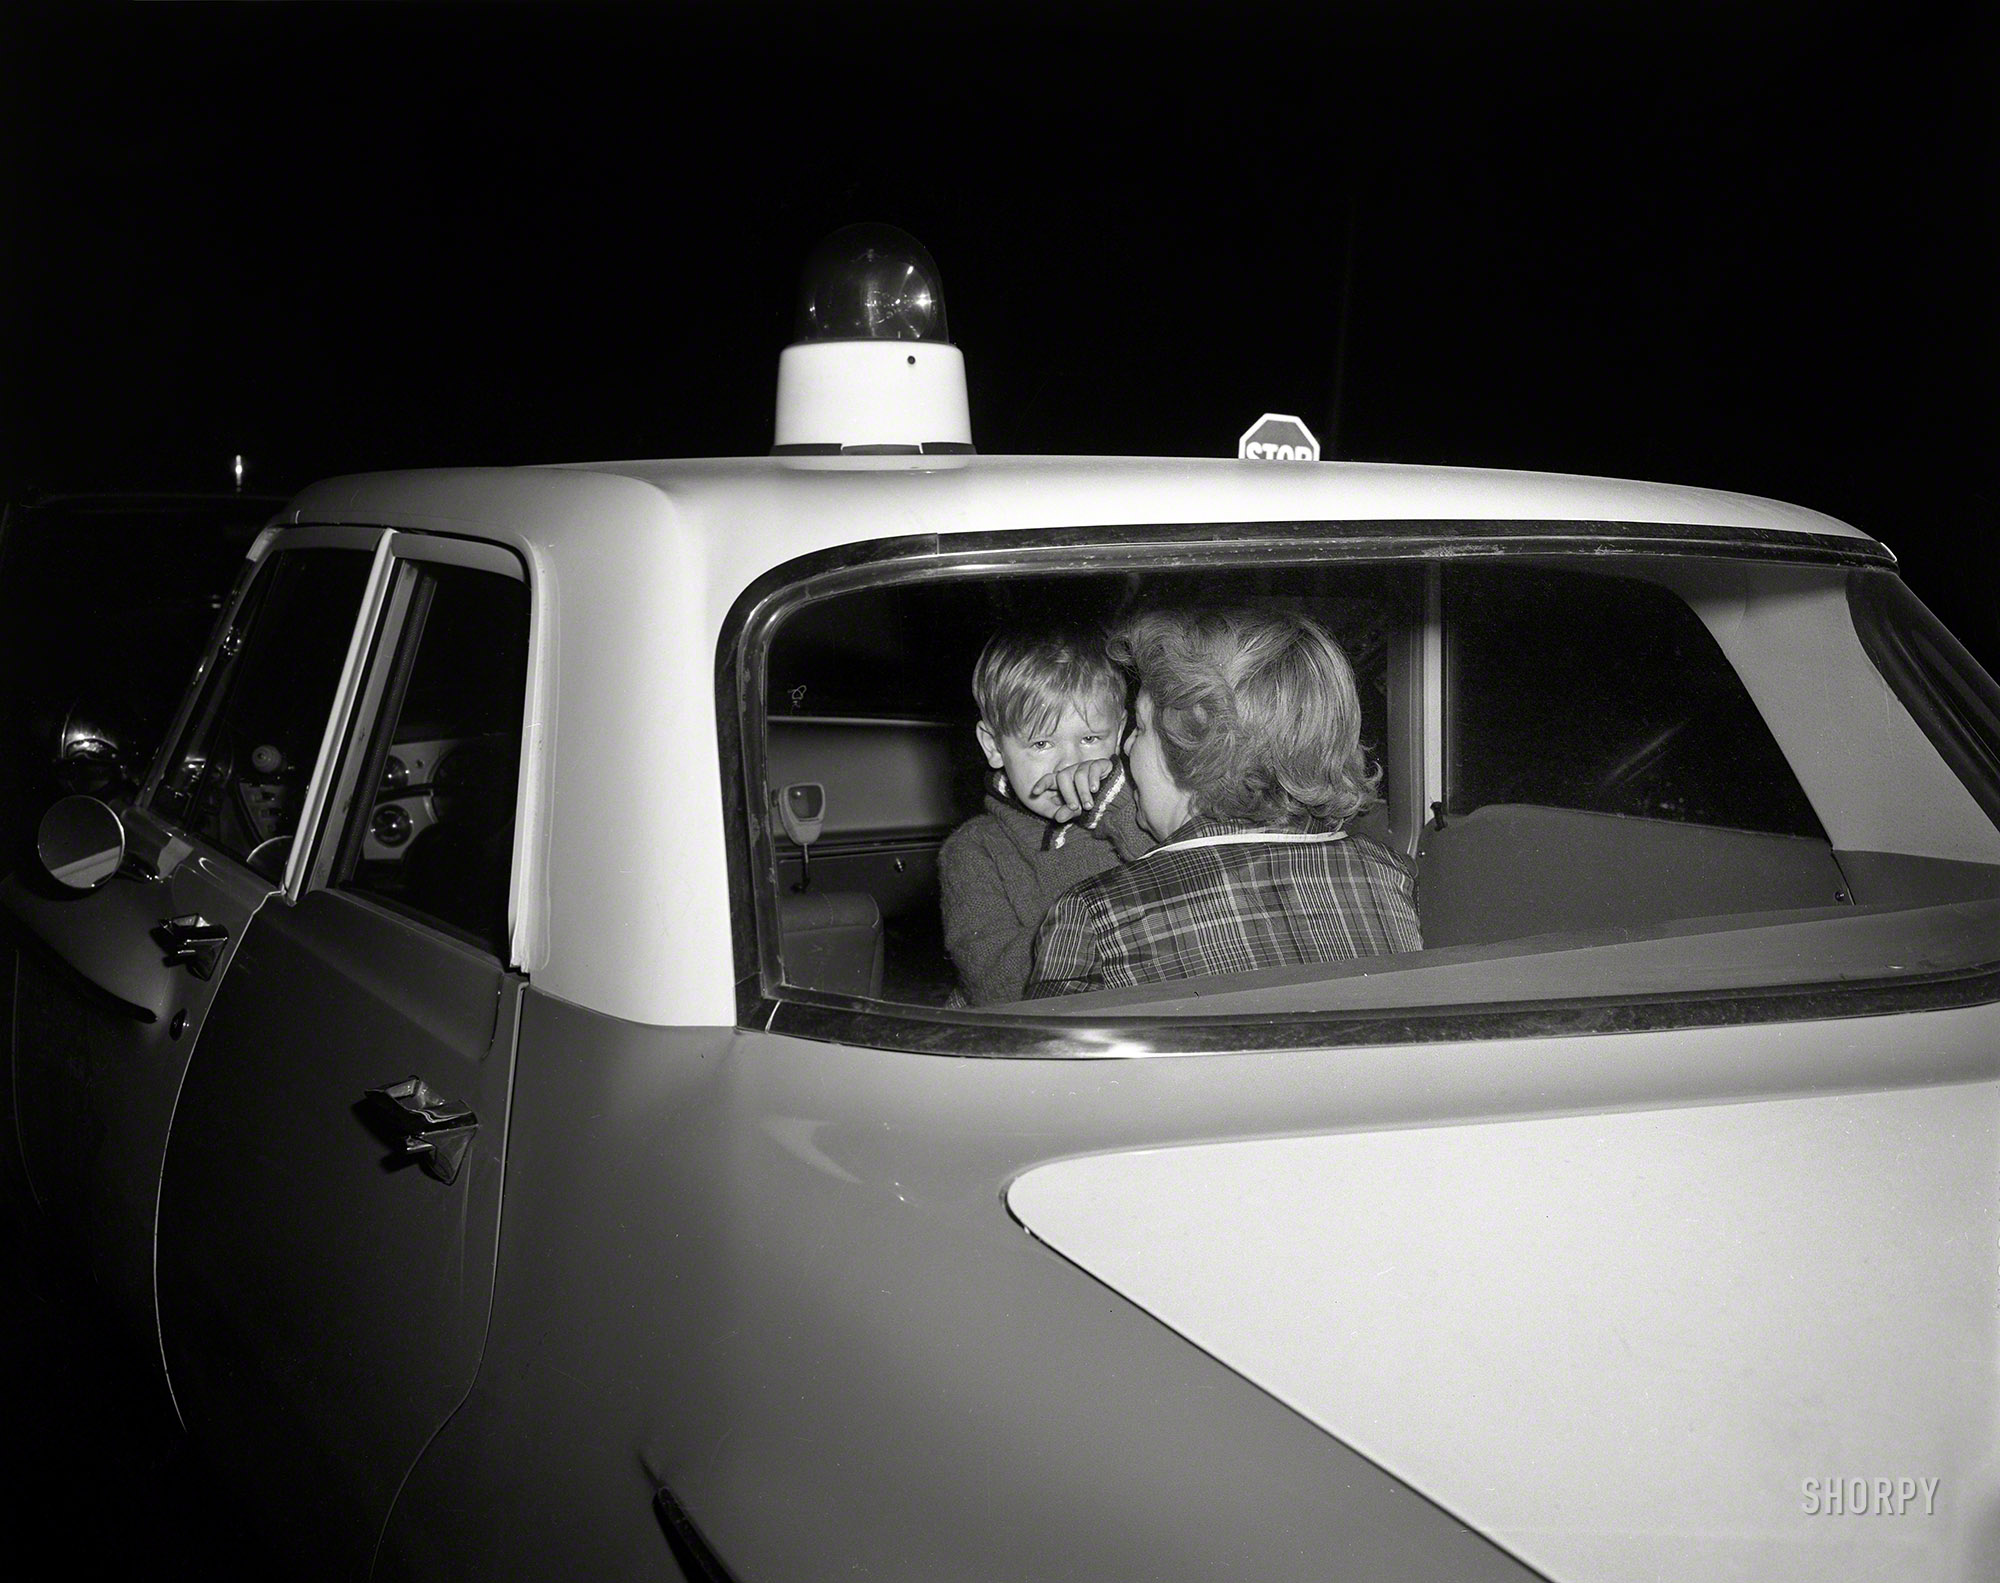 From circa 1962 Chicago comes this uncaptioned shot of a tot in a cop car, caught in the literal glare of publicity. Hopefully the past fifty-odd years have made things all better. 4x5 acetate negative from the News Photo Archive. View full size.